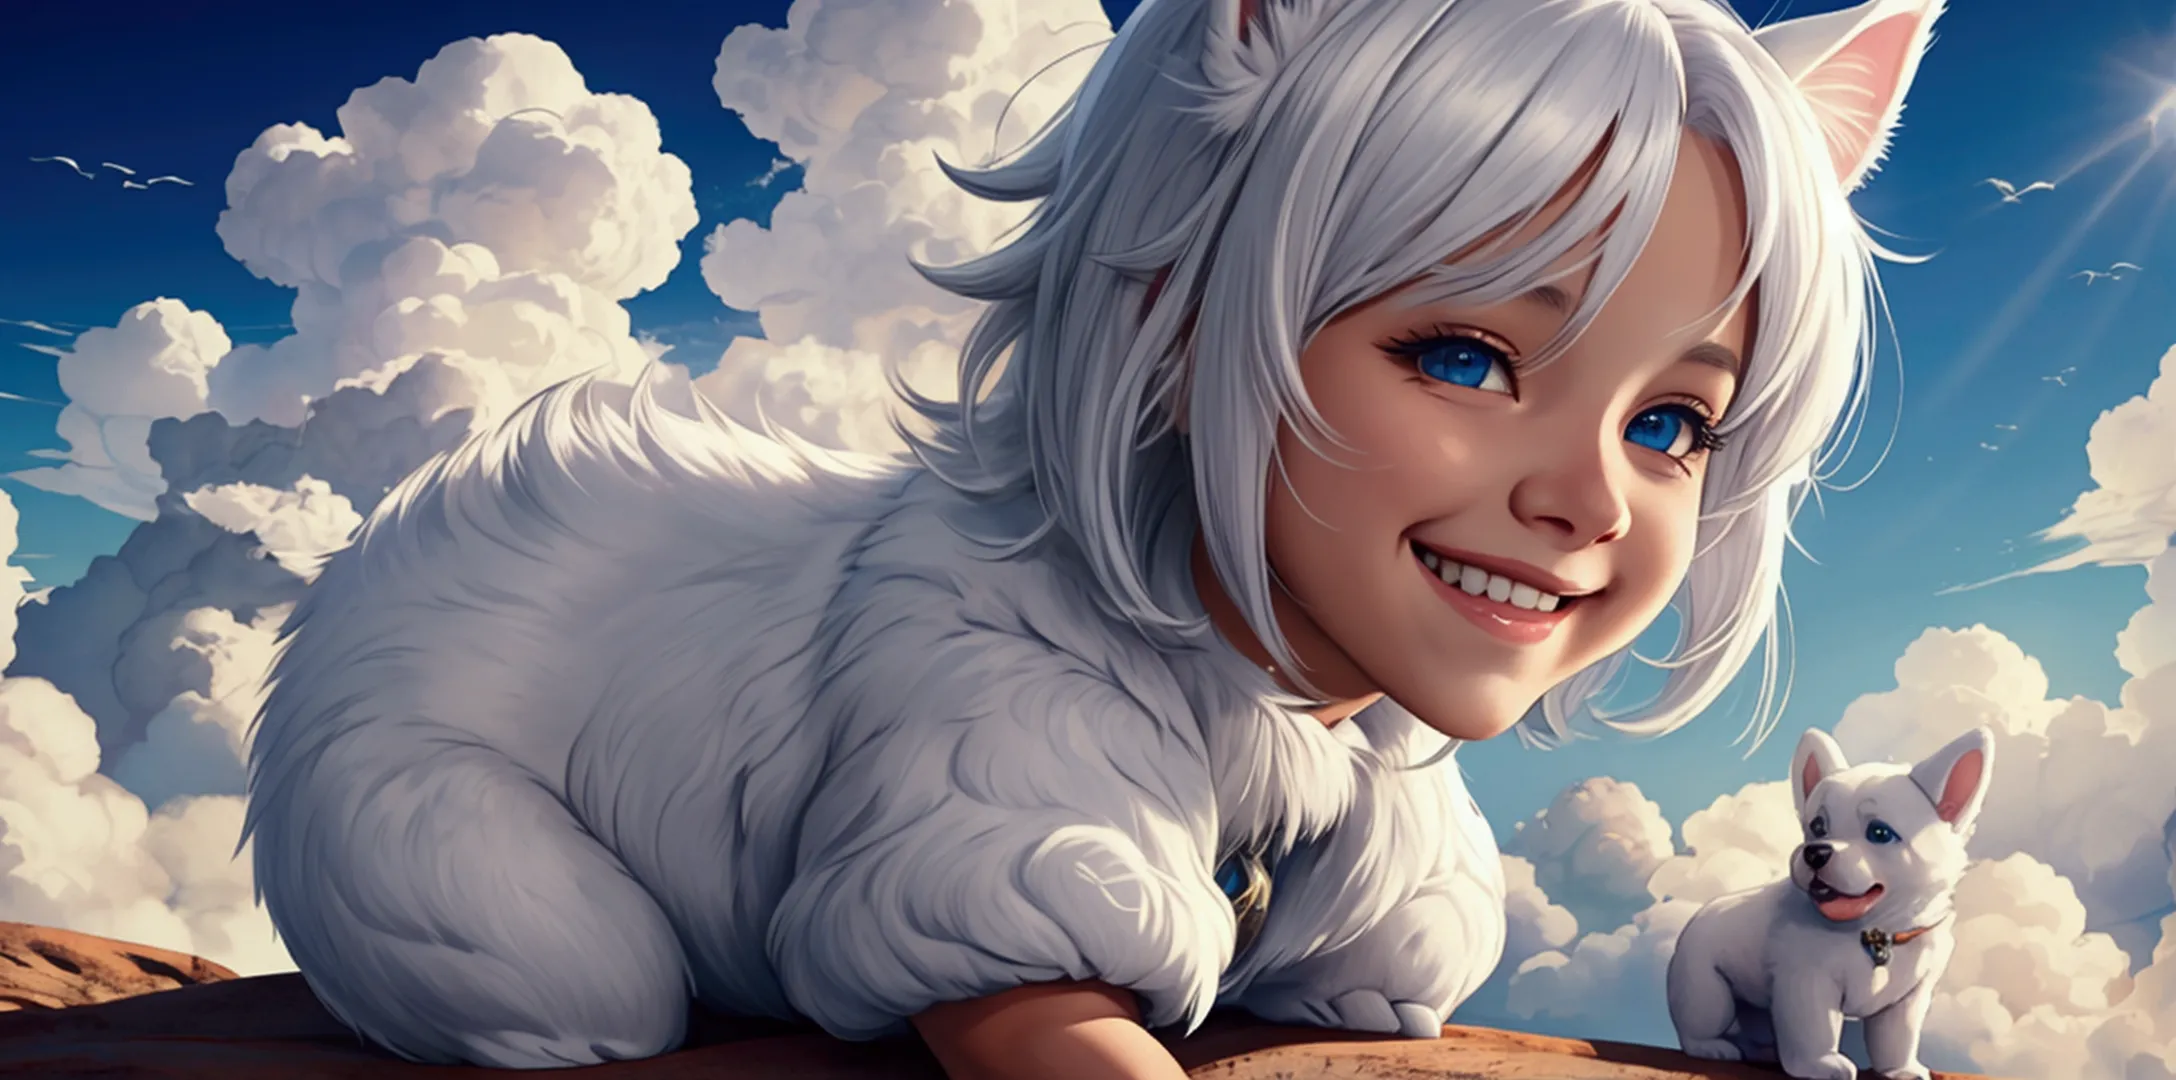 Riding on the clouds　puppy　cute　White hair　smile